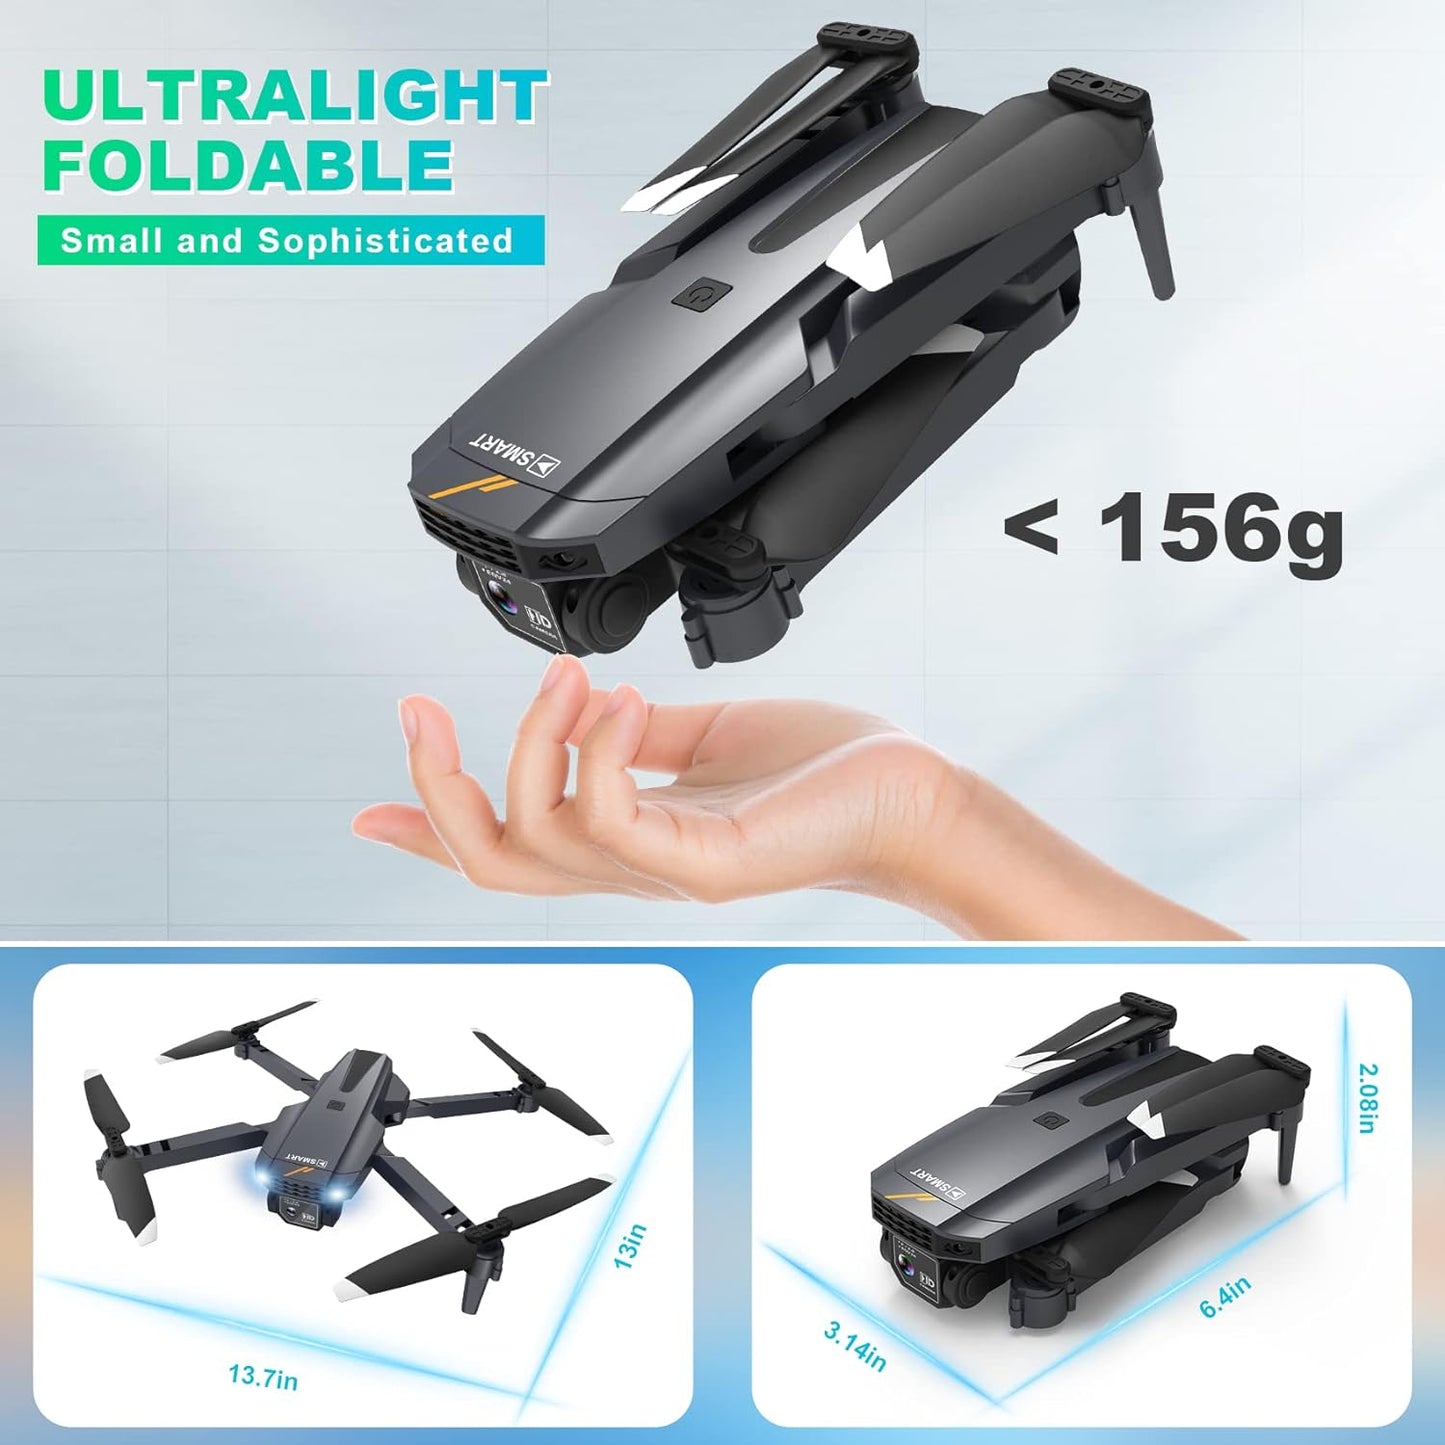 TERCASO 1810 Drone, ULTRALIGHT FOLDABLE Small and Sophisticated 